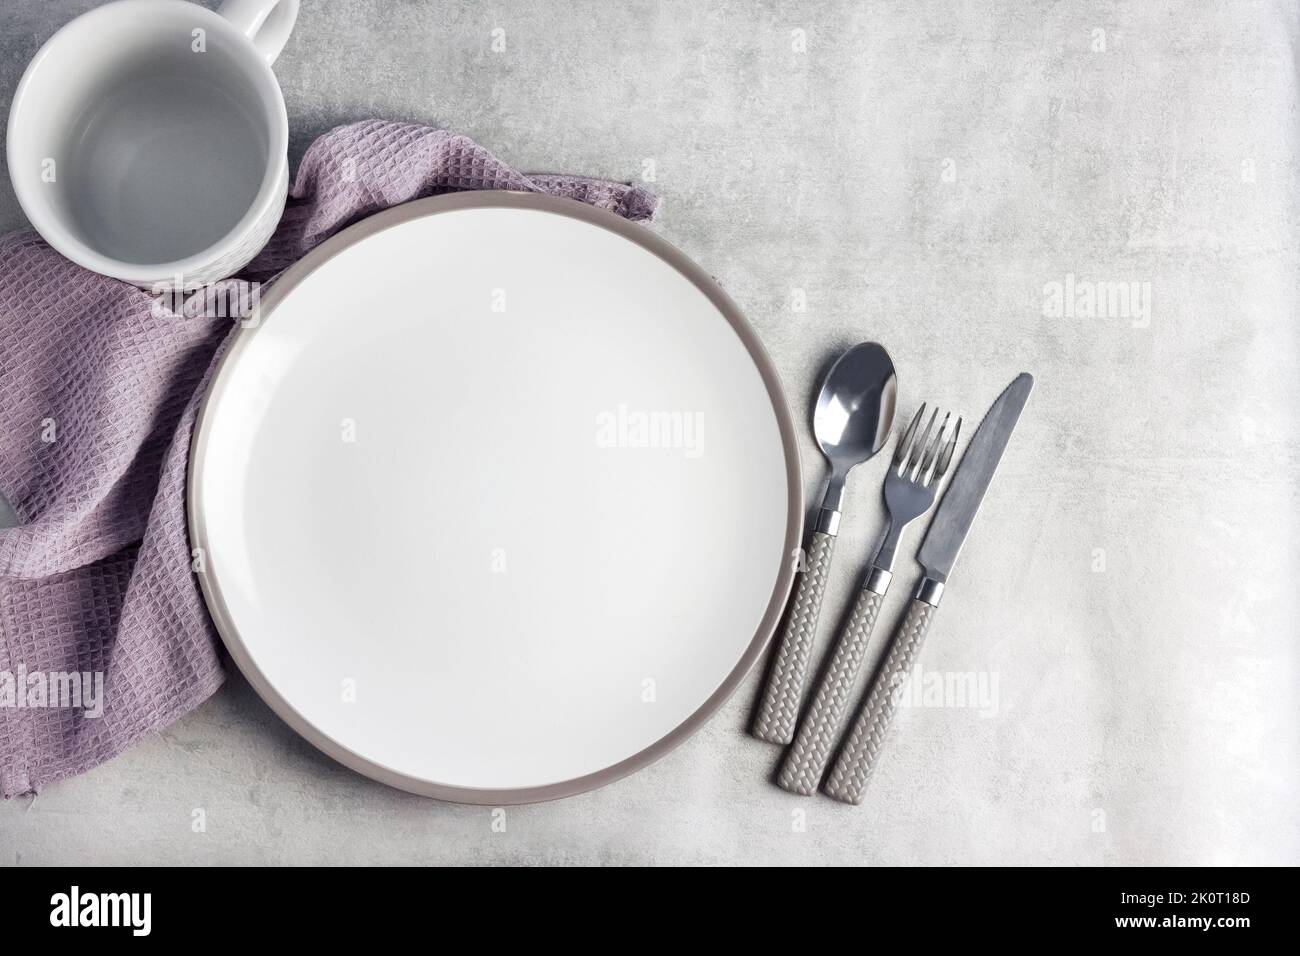 Table setting. White plate, mug, cutlery and napkin on light gray background. Flat lay, top view, copy space. Stock Photo